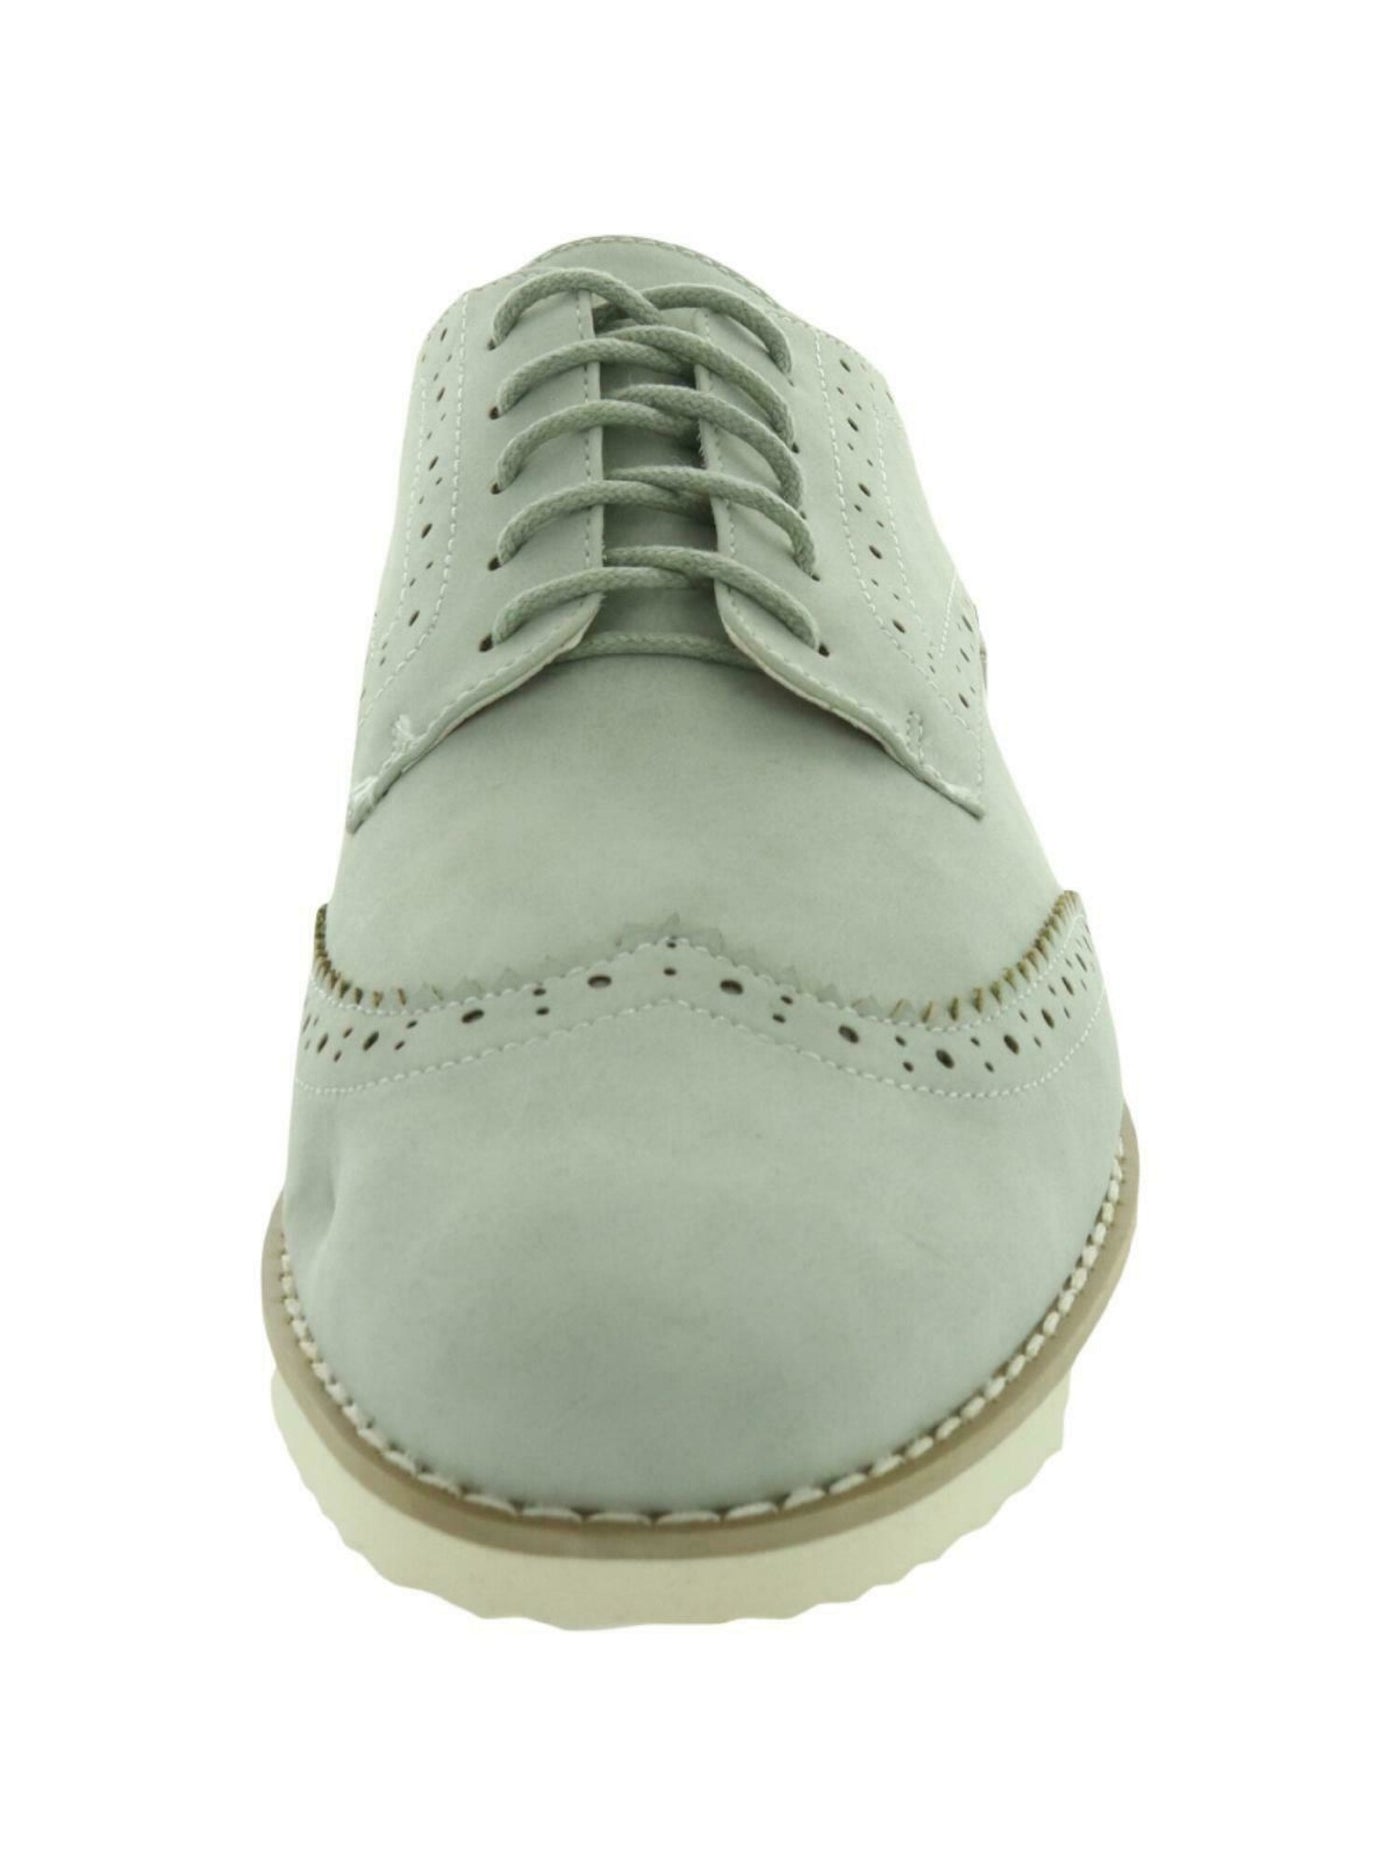 JOURNEE COLLECTION Womens Gray Wingtip Detail Cushioned Sissy Almond Toe Lace-Up Loafers Shoes 6